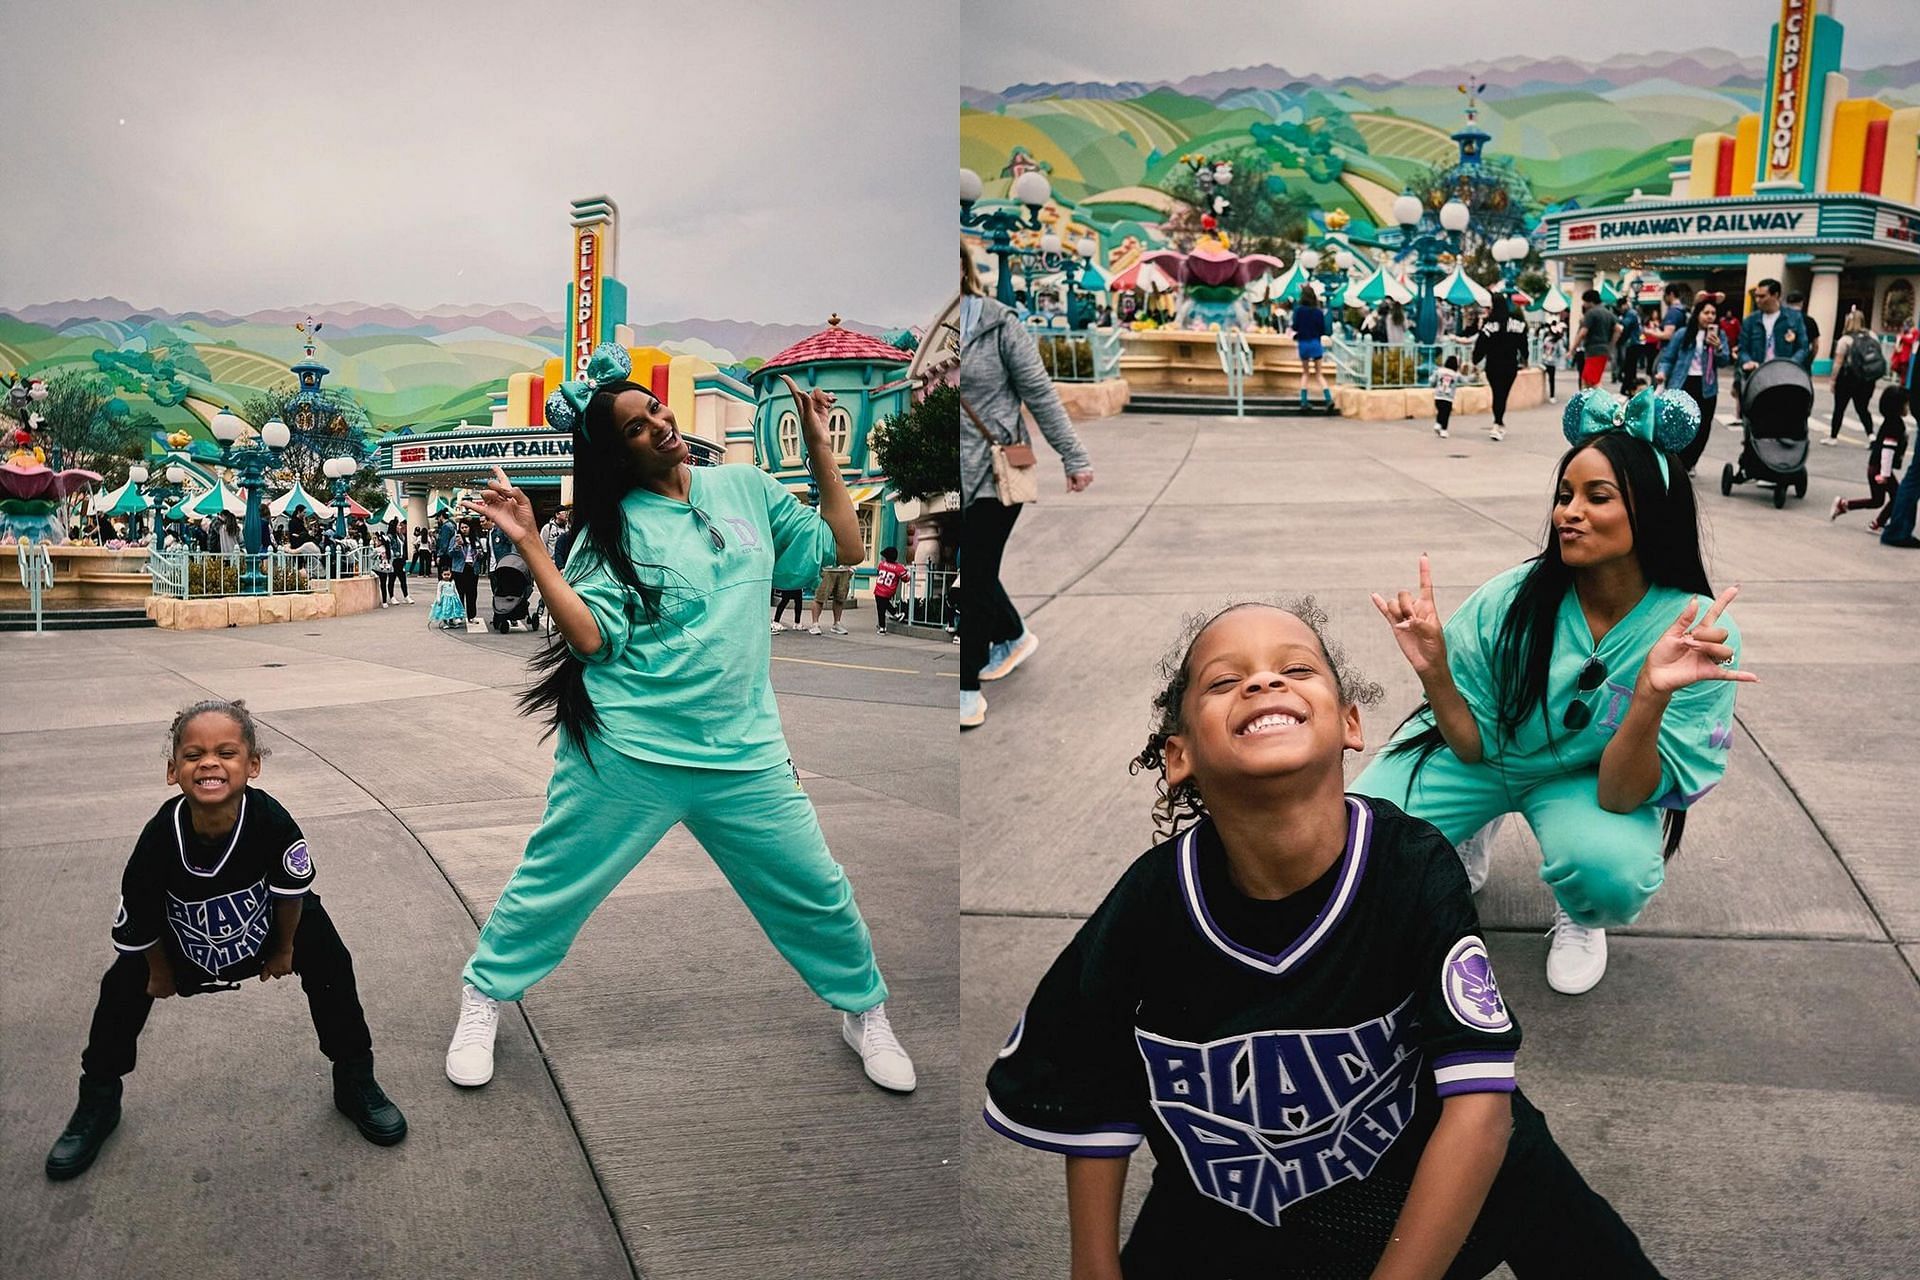 Ciara steps out in Disneyland one-on-one time with youngest son Win Wilson (Image Courtesy: Instagram @ciara)